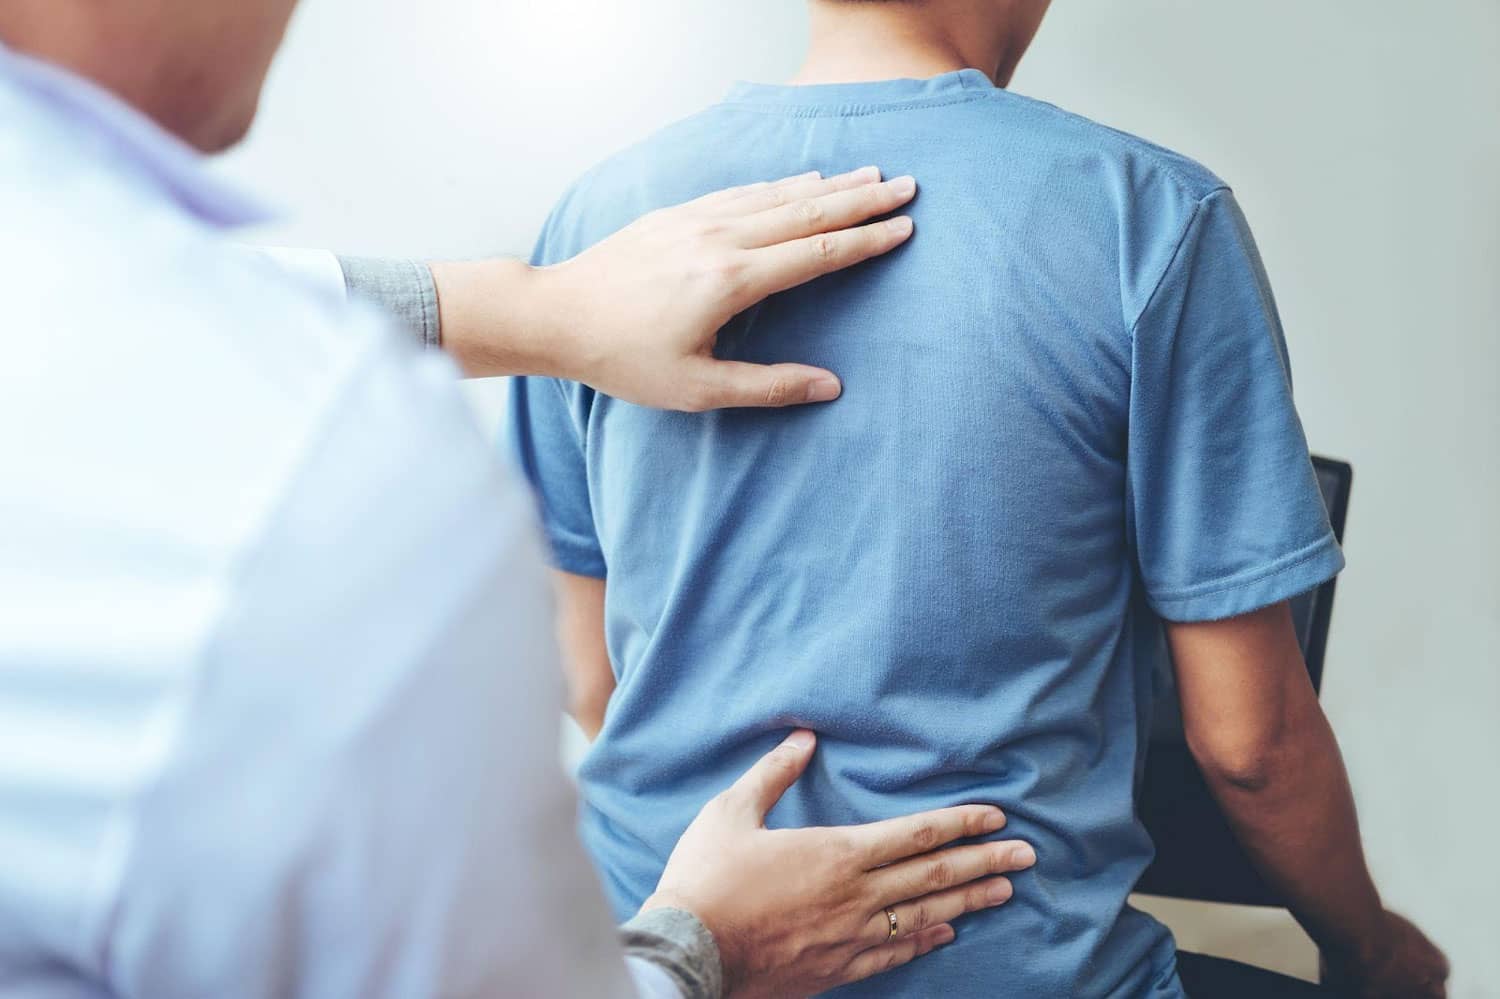 A man is being treated by a chiropractor for back pain.